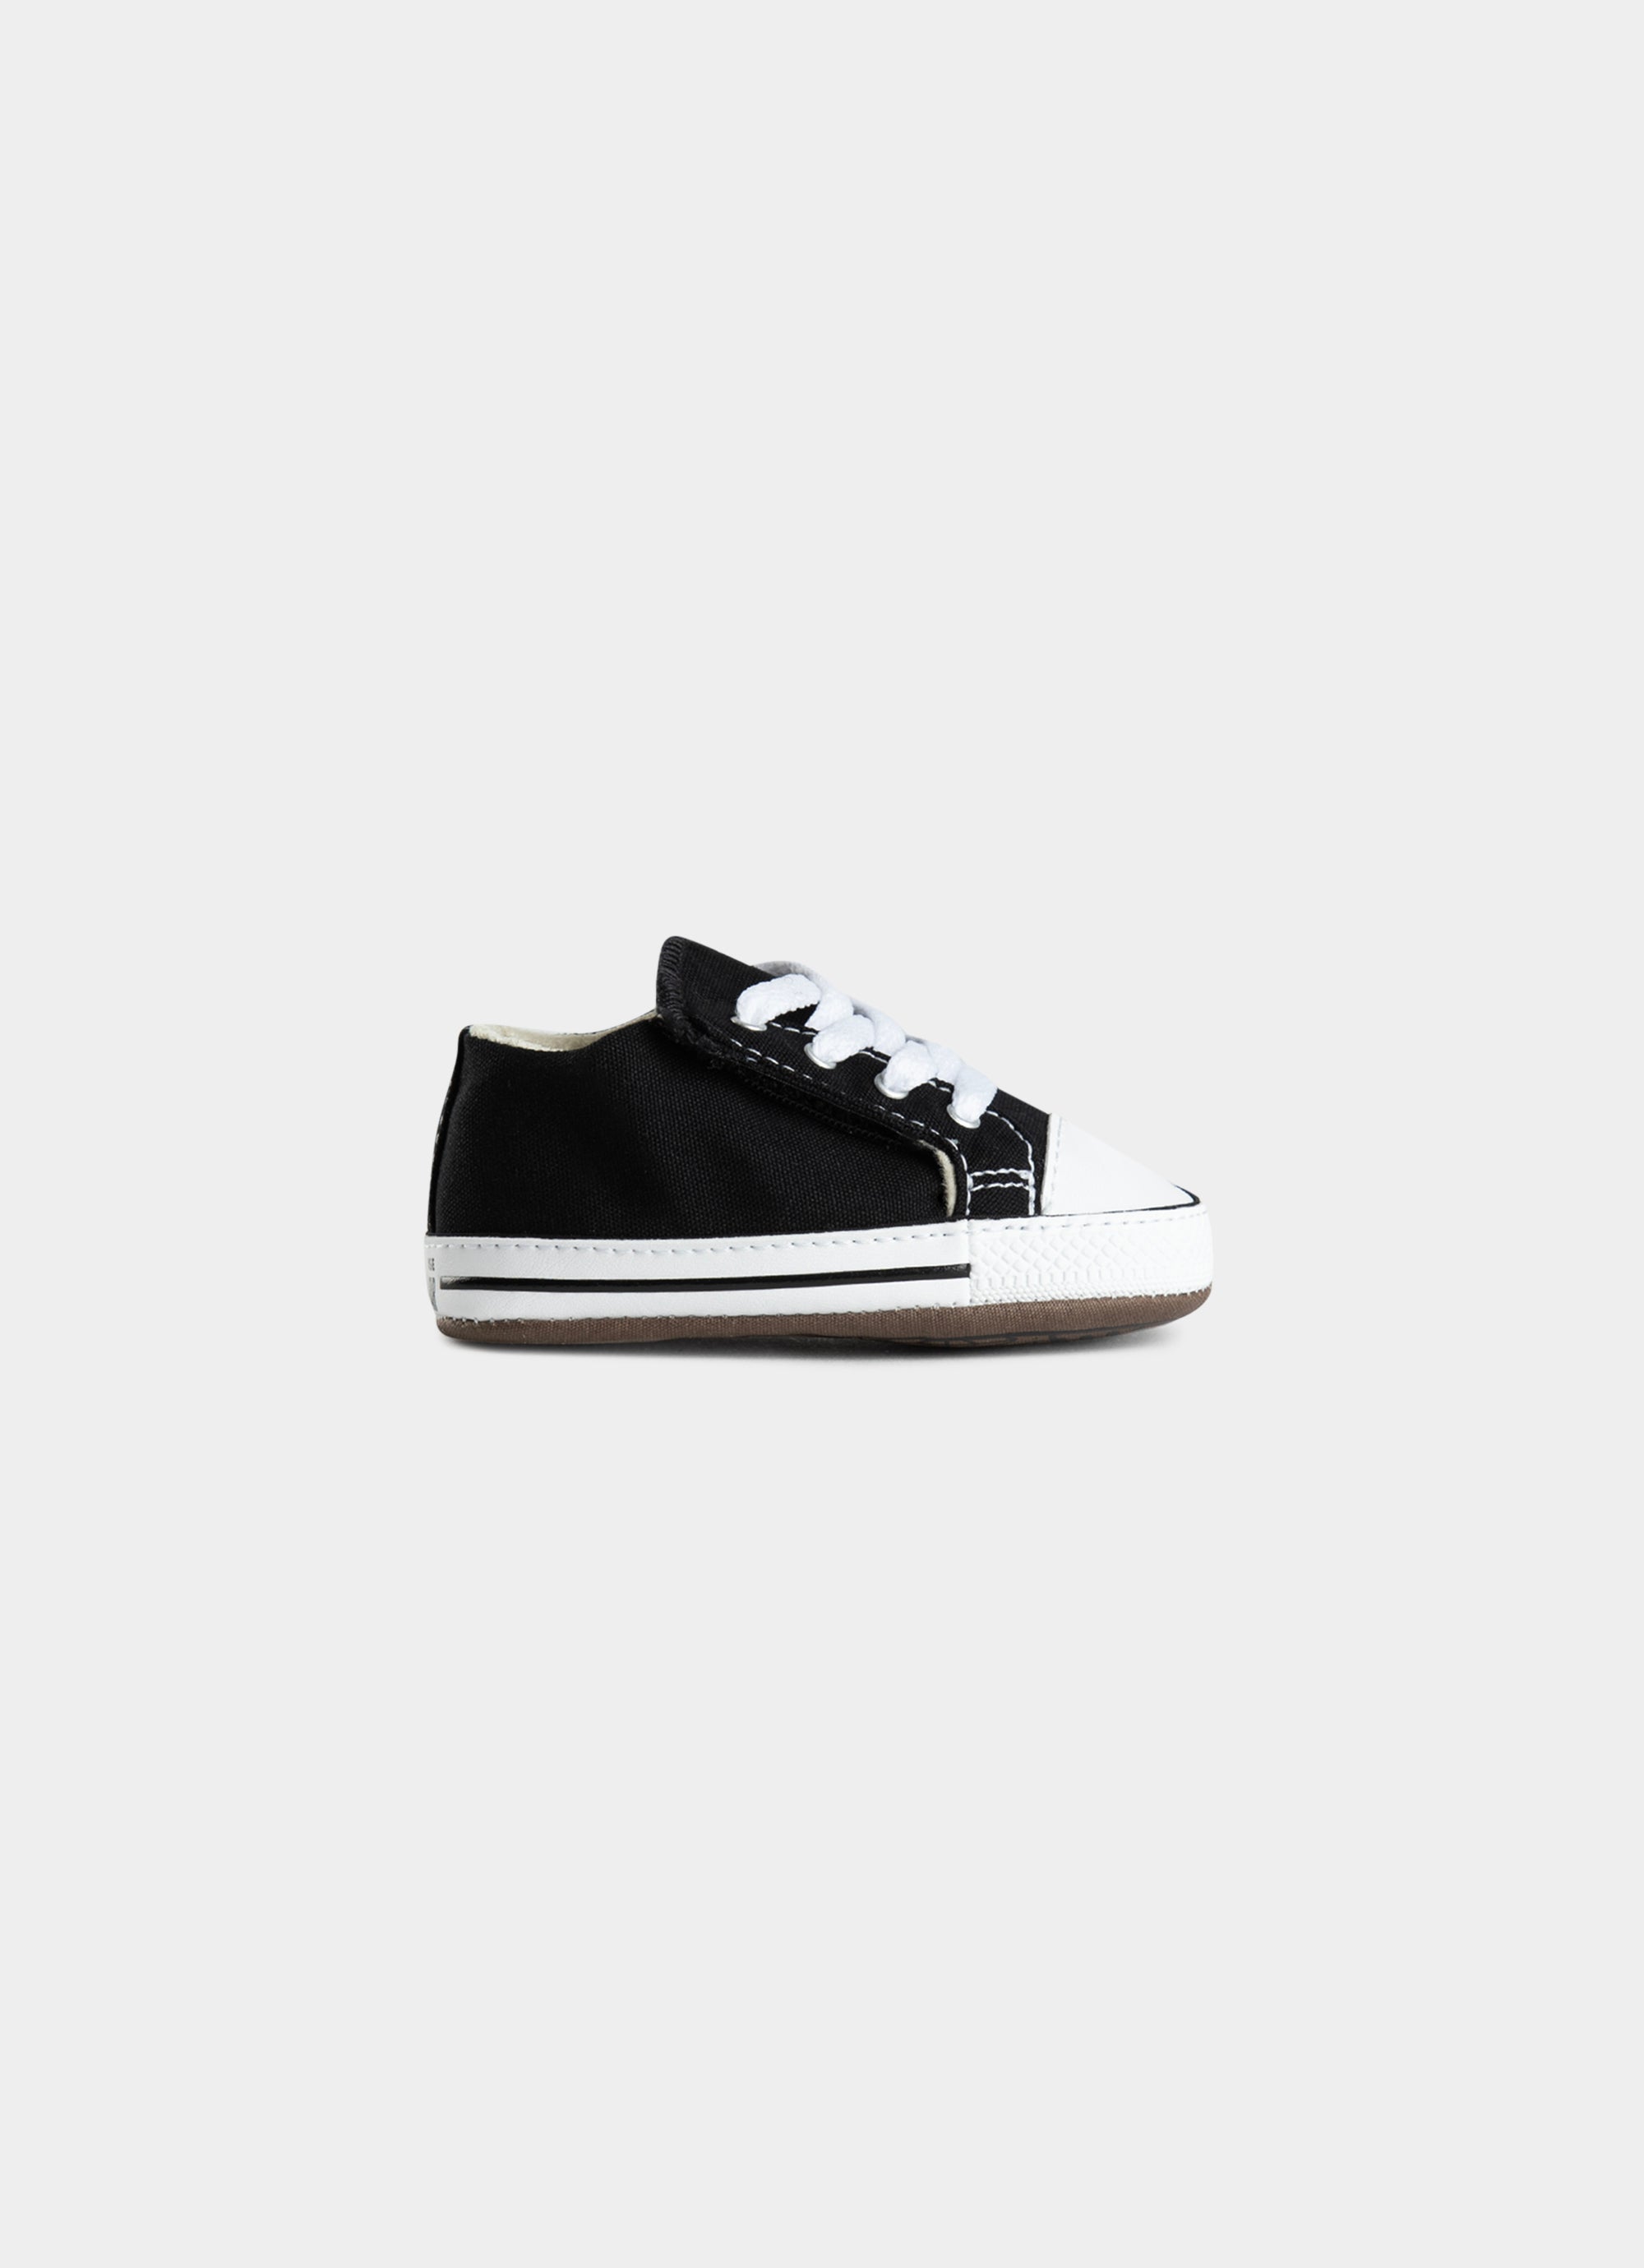 baby converse shoes nz